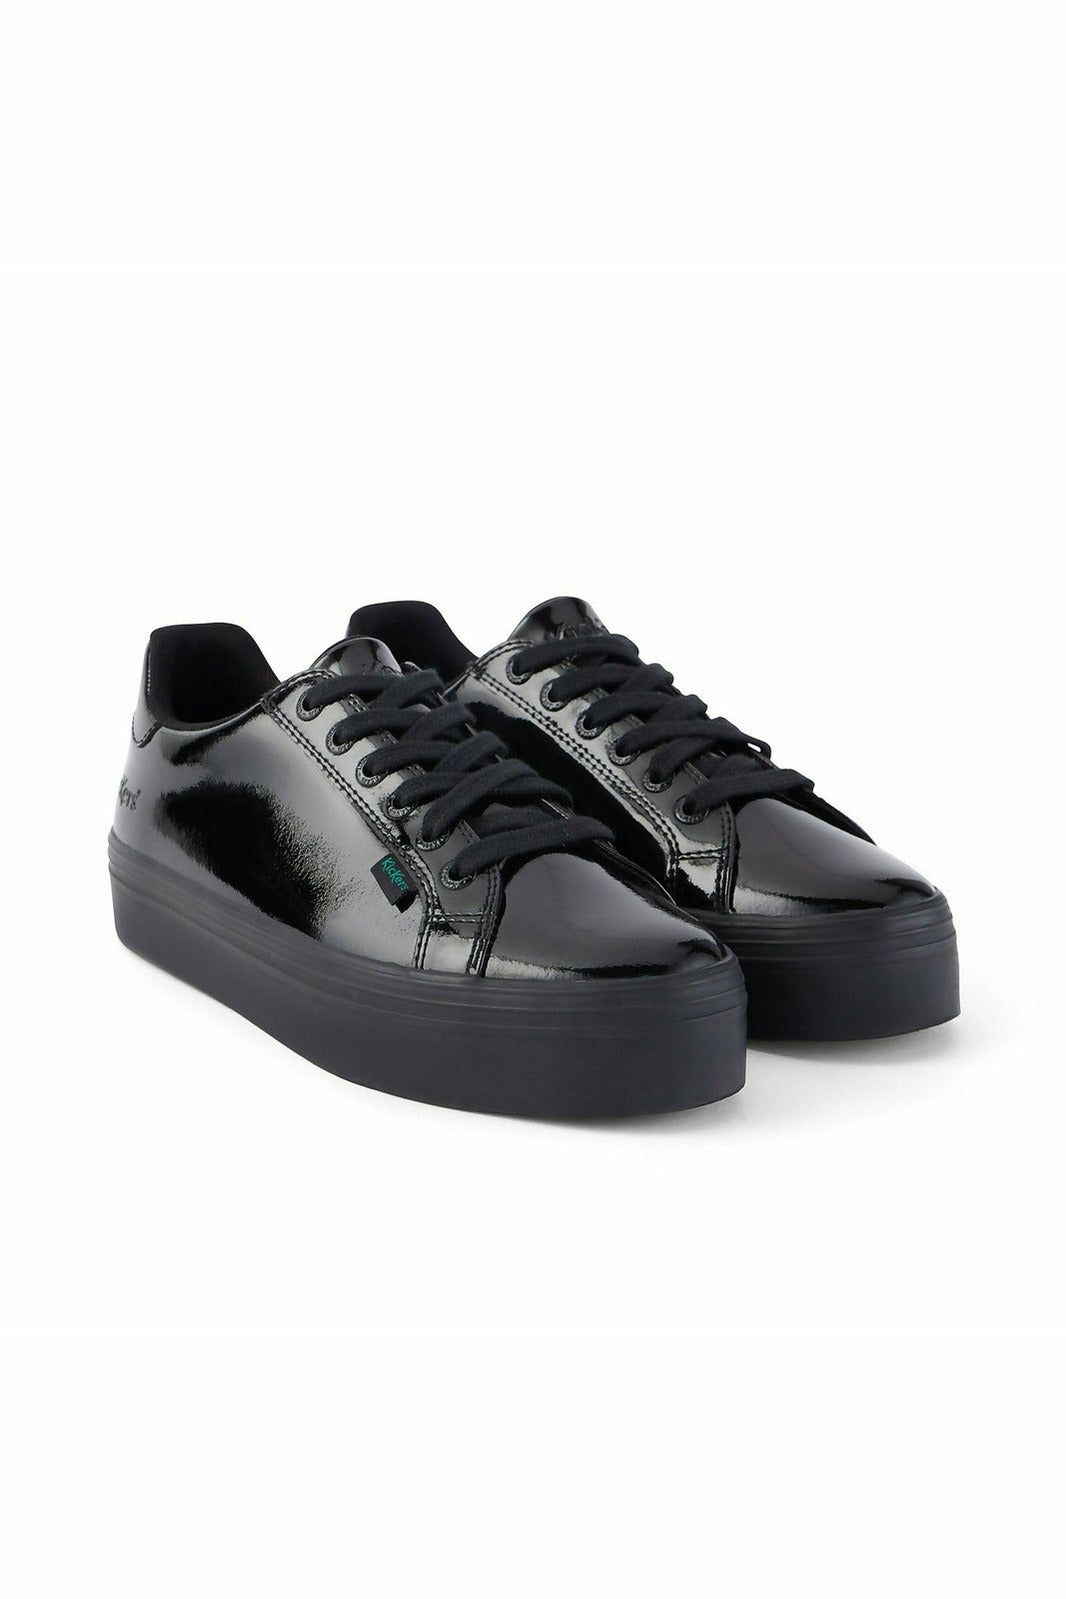 Opera Malaise contrast Kickers Tovni Stack Black Patent at Meeks Shoes